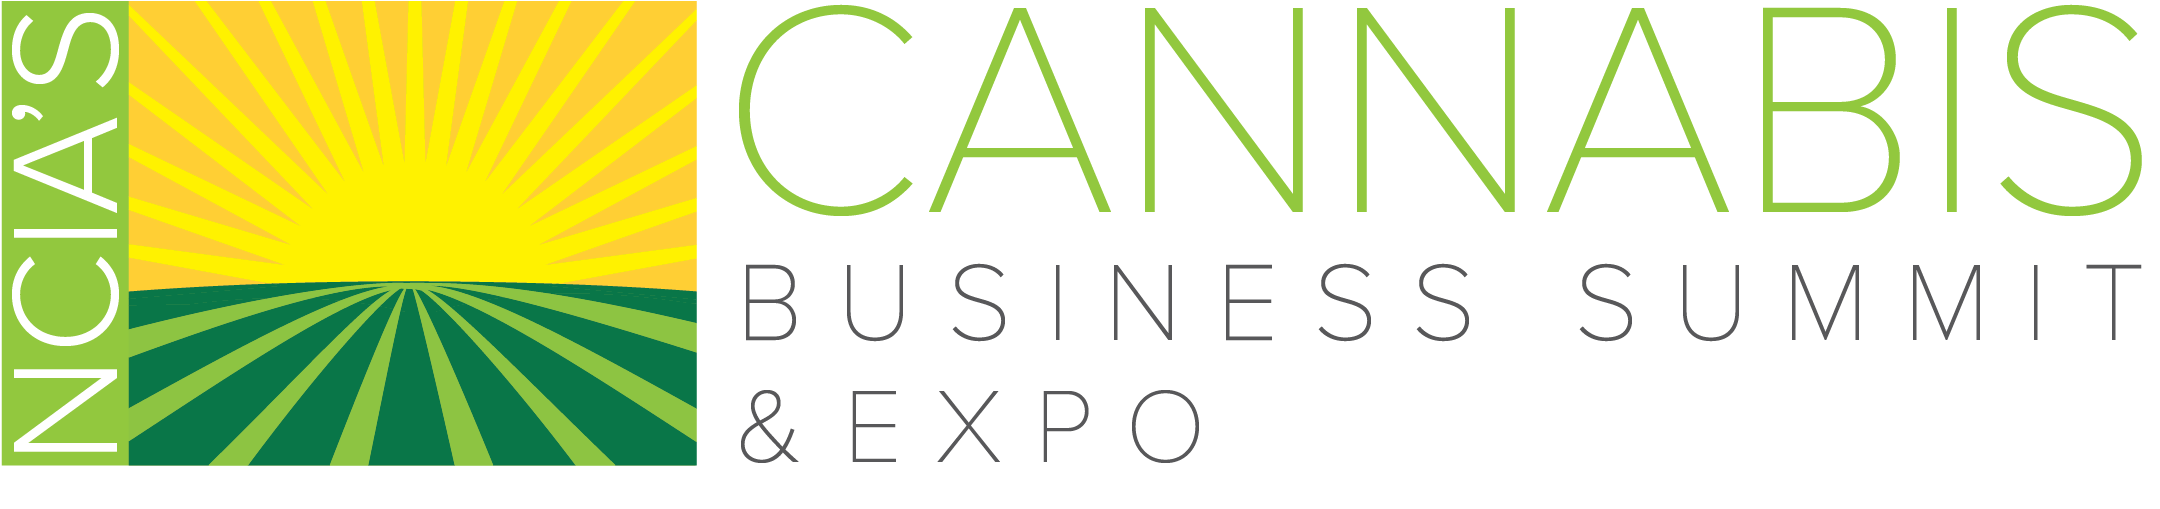 Cannabis Business Summit & Expo 2019